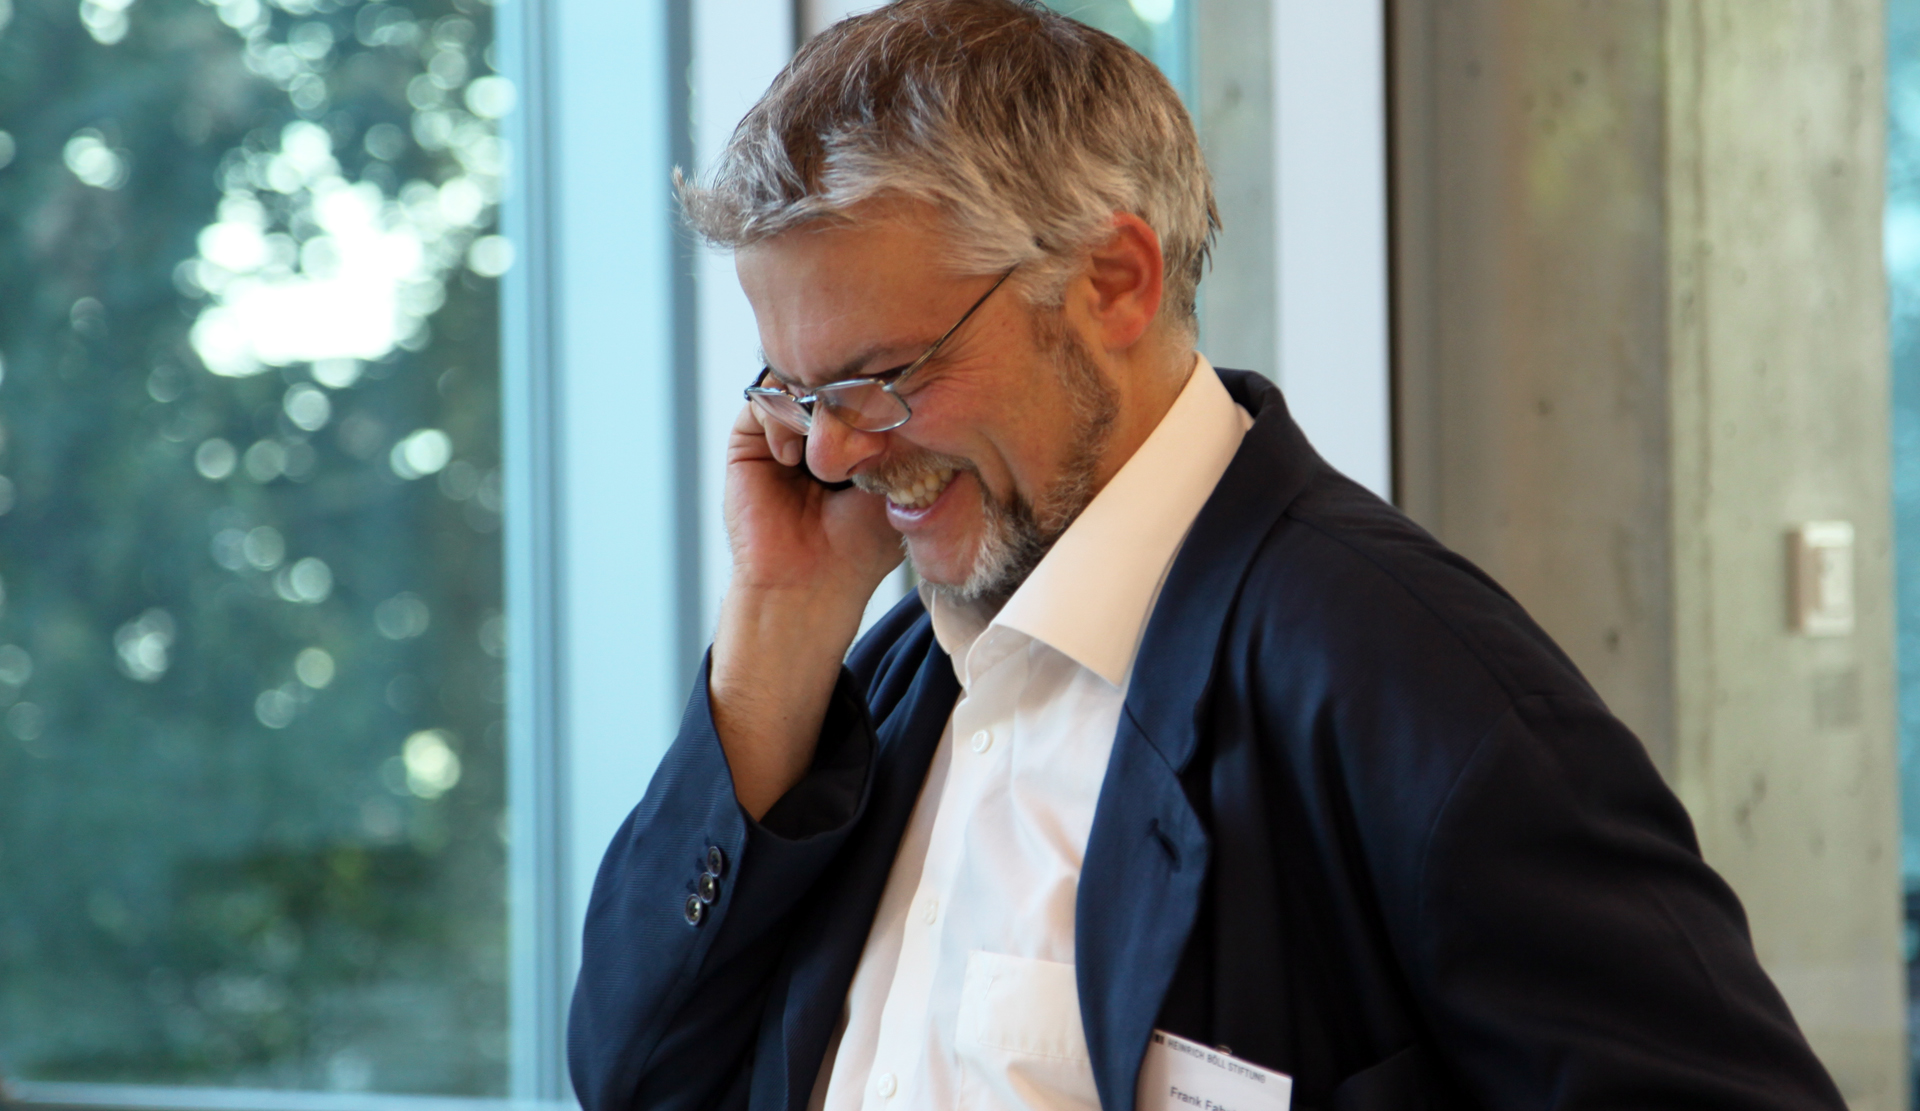 a man talking on a phone wearing a suit and glasses